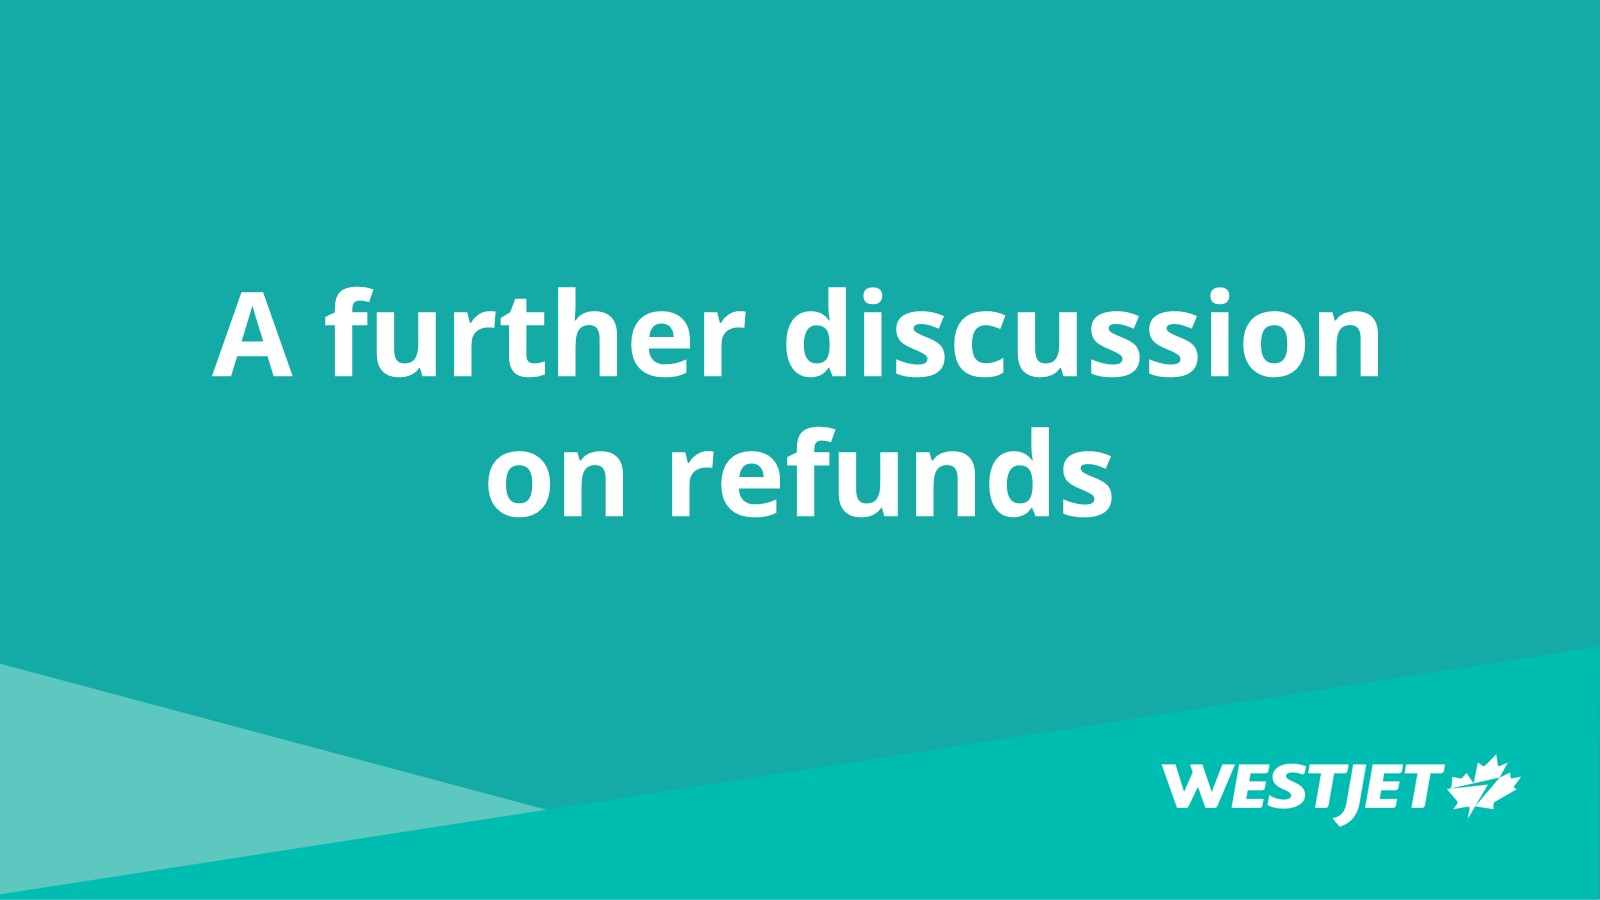 A further discussion on refunds